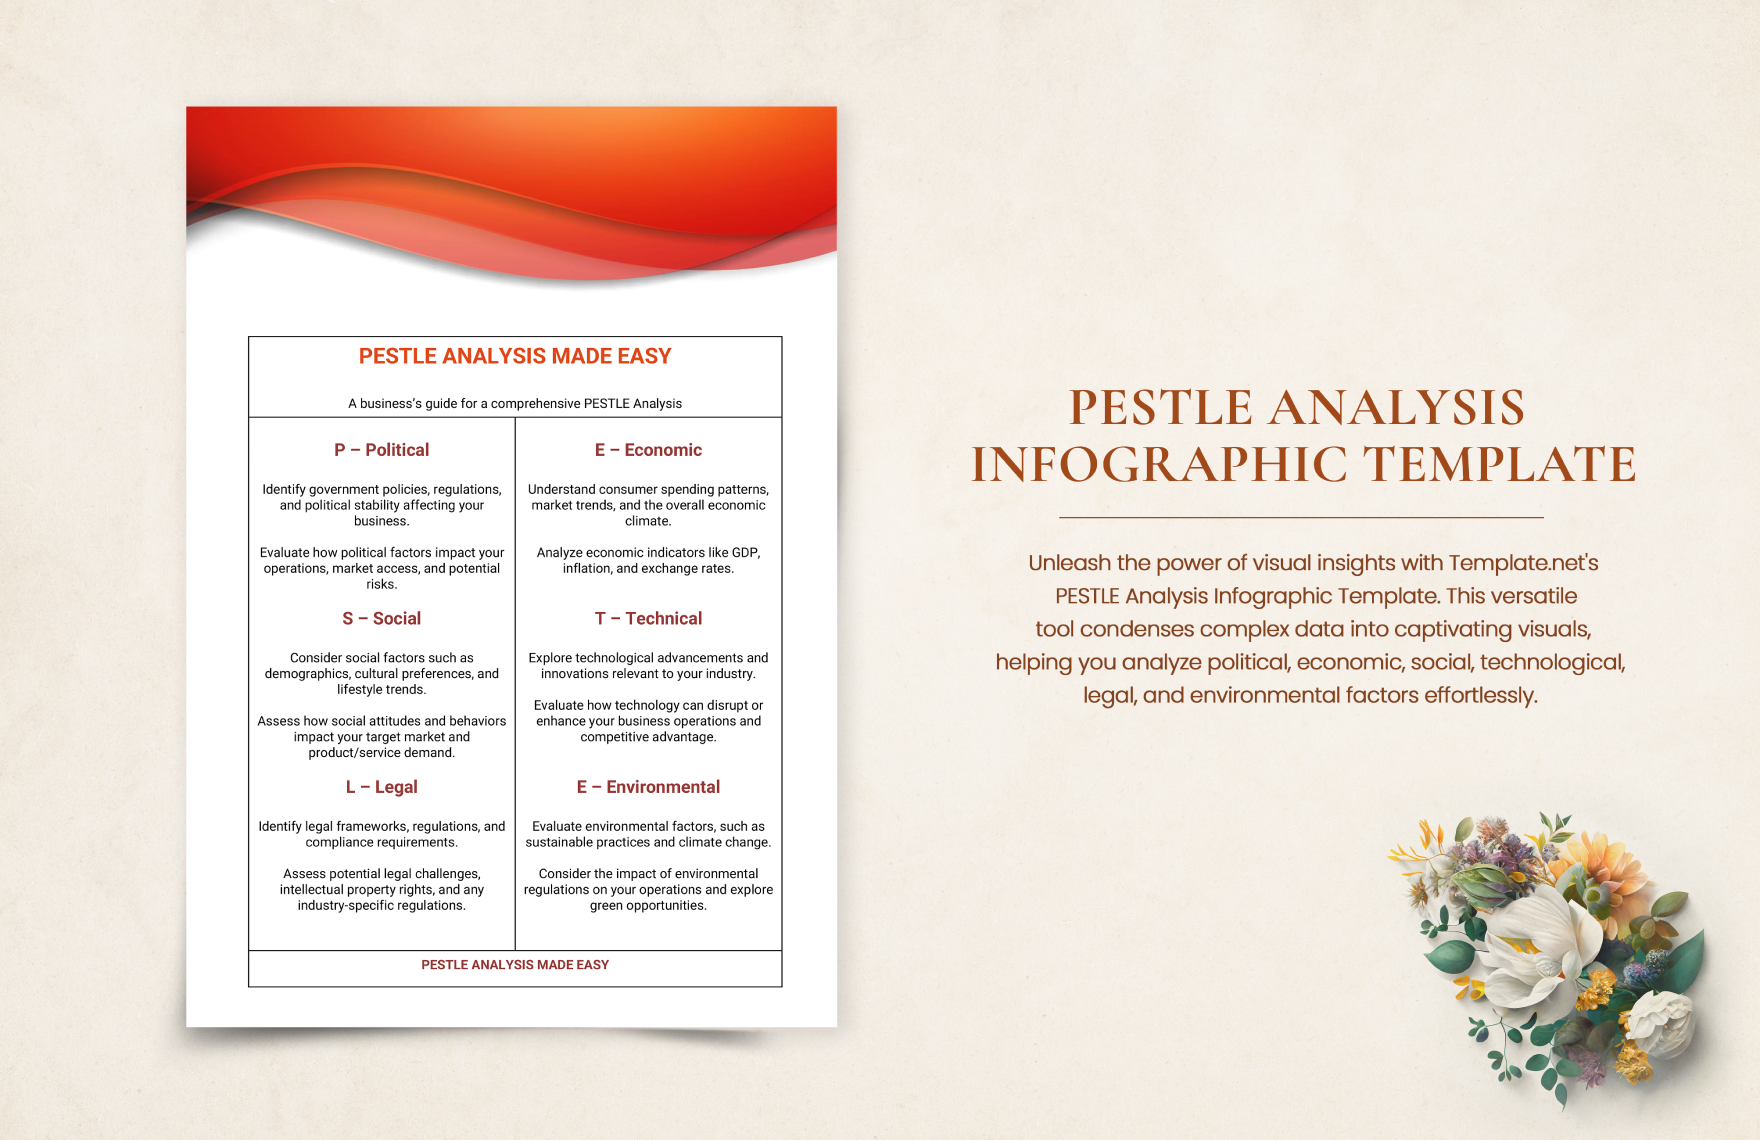 Pestle Analysis Infographic Template